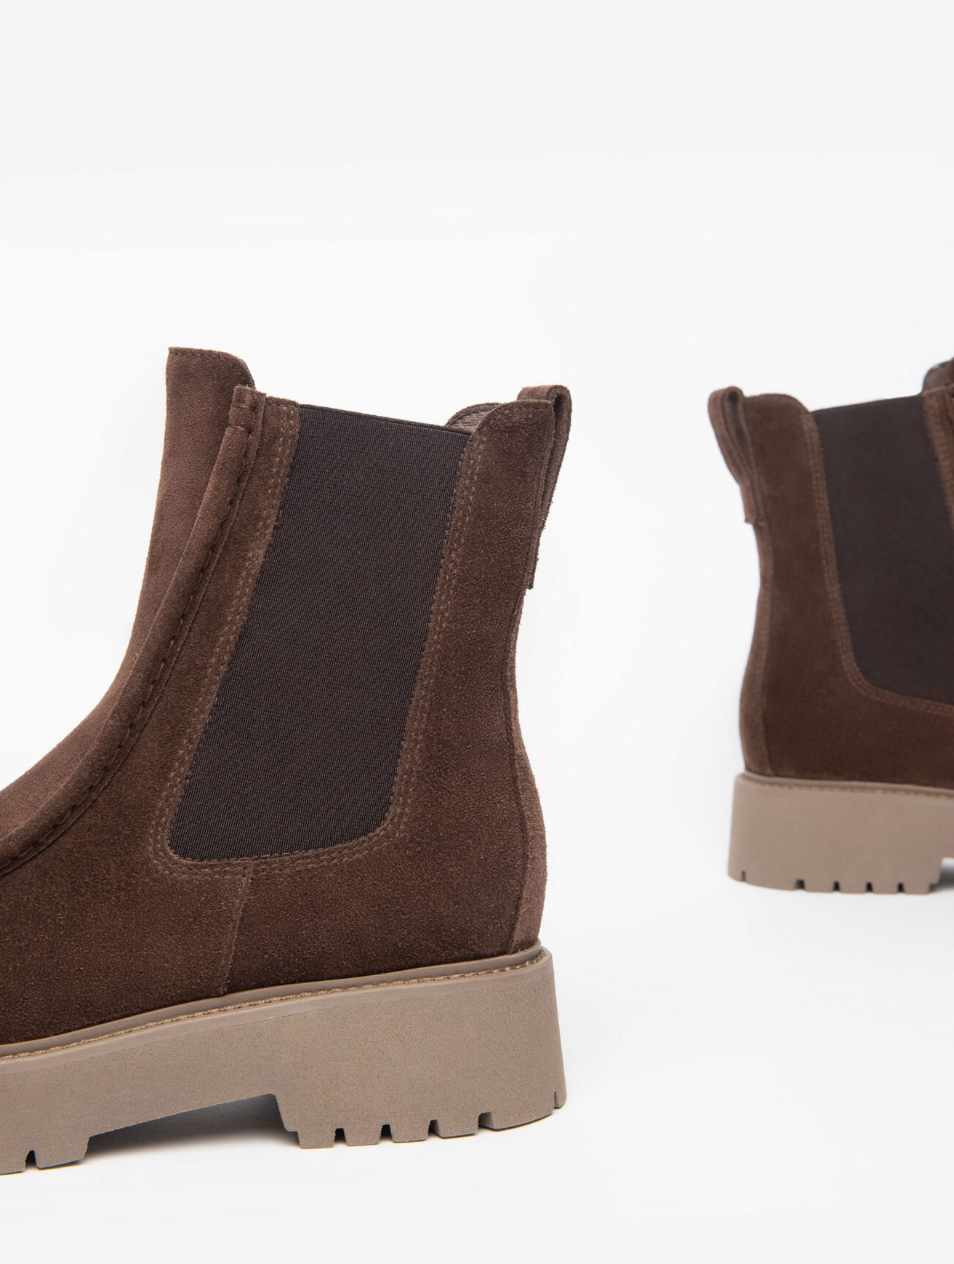 Brown Suede Leather Boot